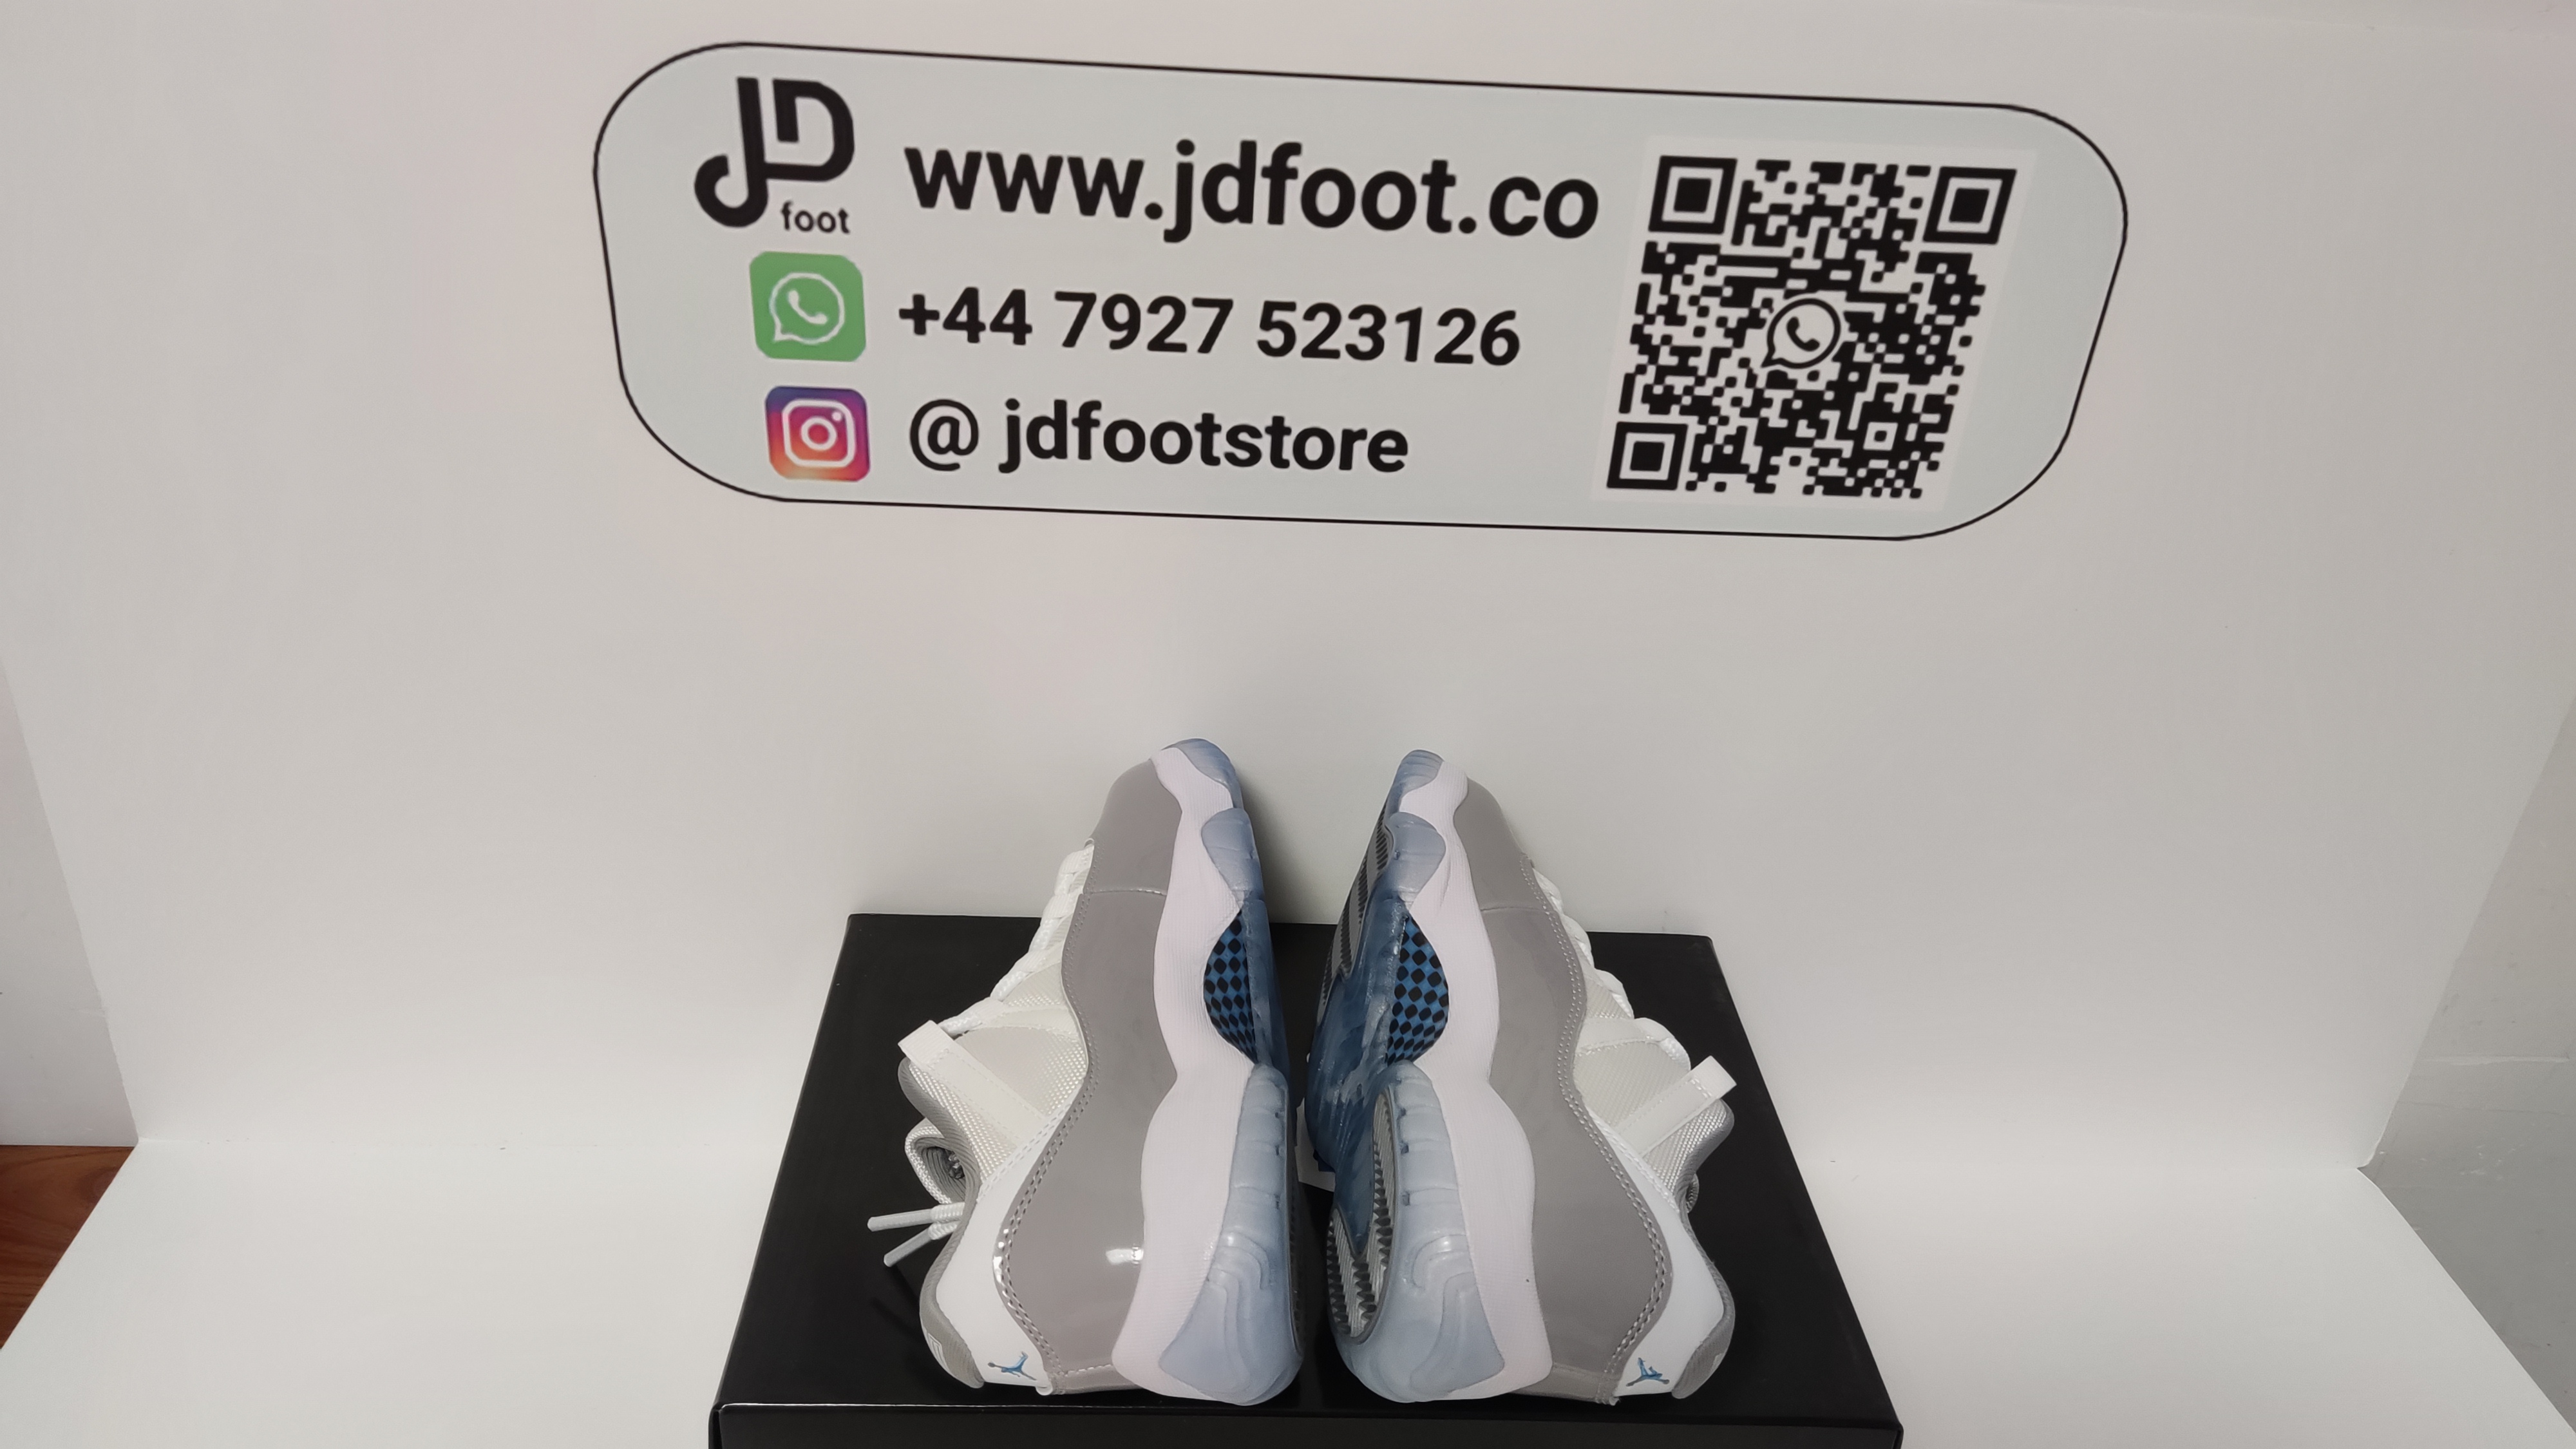 Quality Check Picture Replica Jordan 11 Low Cement Grey From Jdfoot